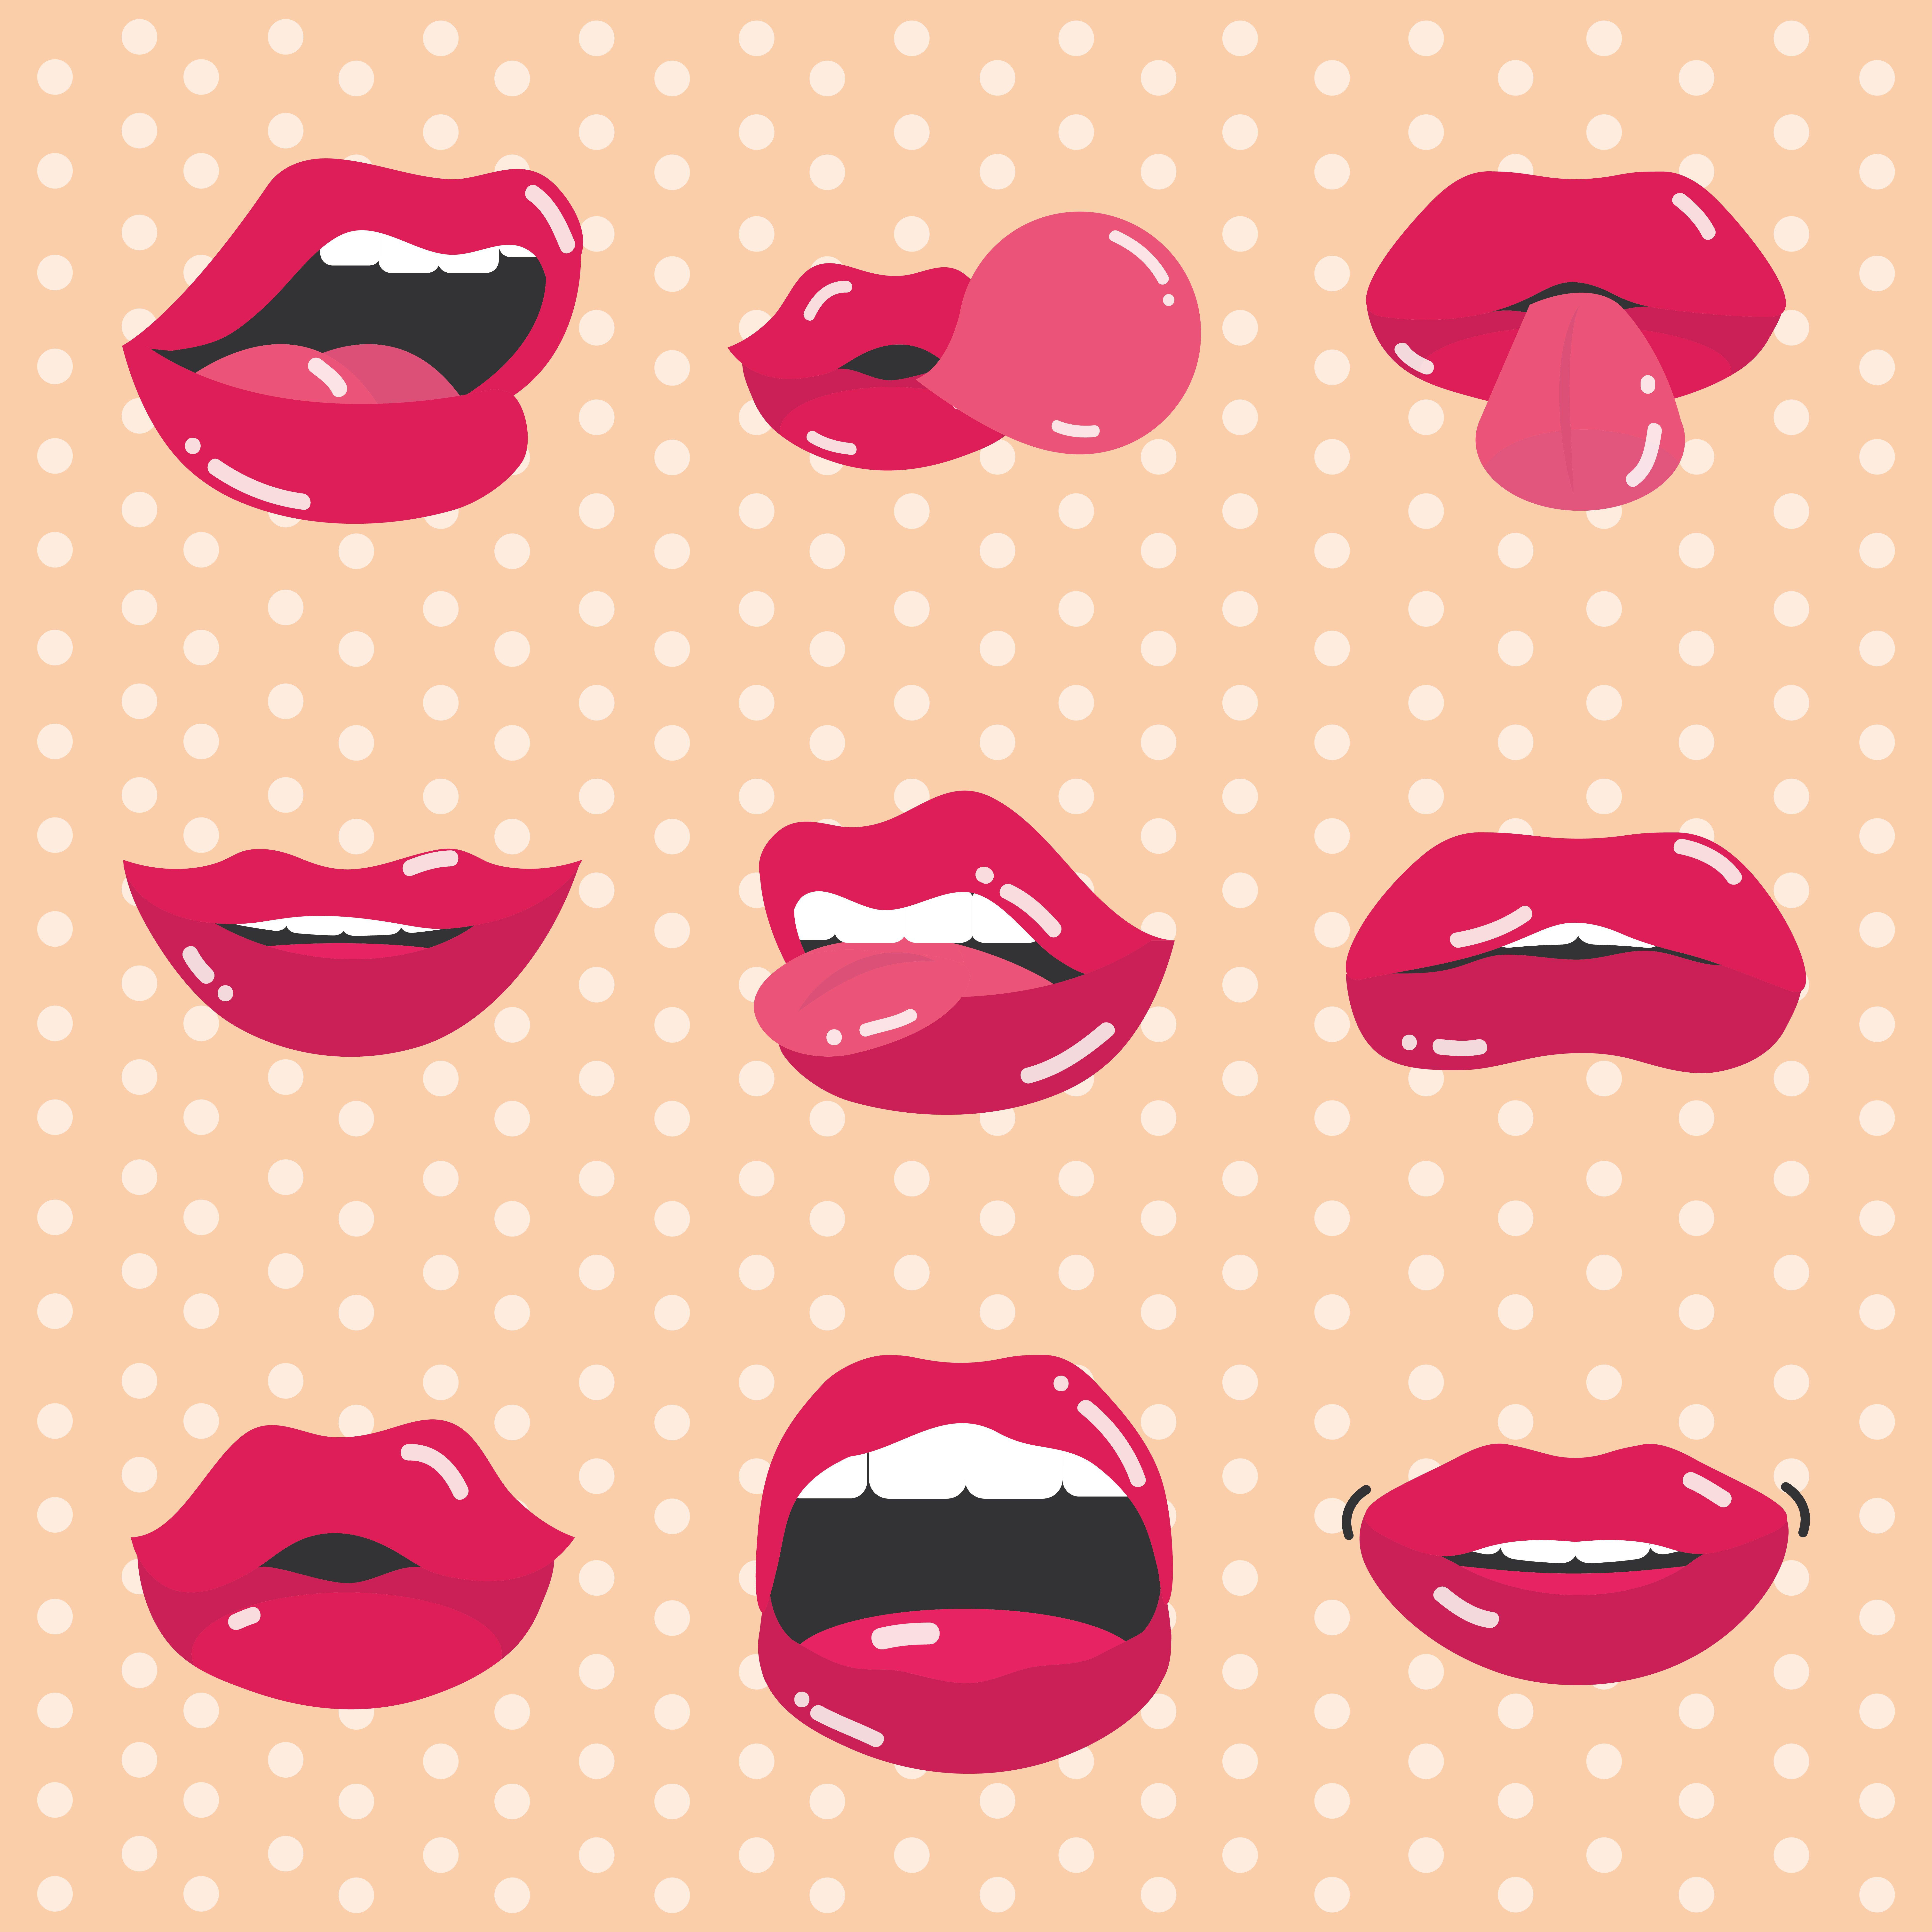 A set of lips with different expressions - Lips